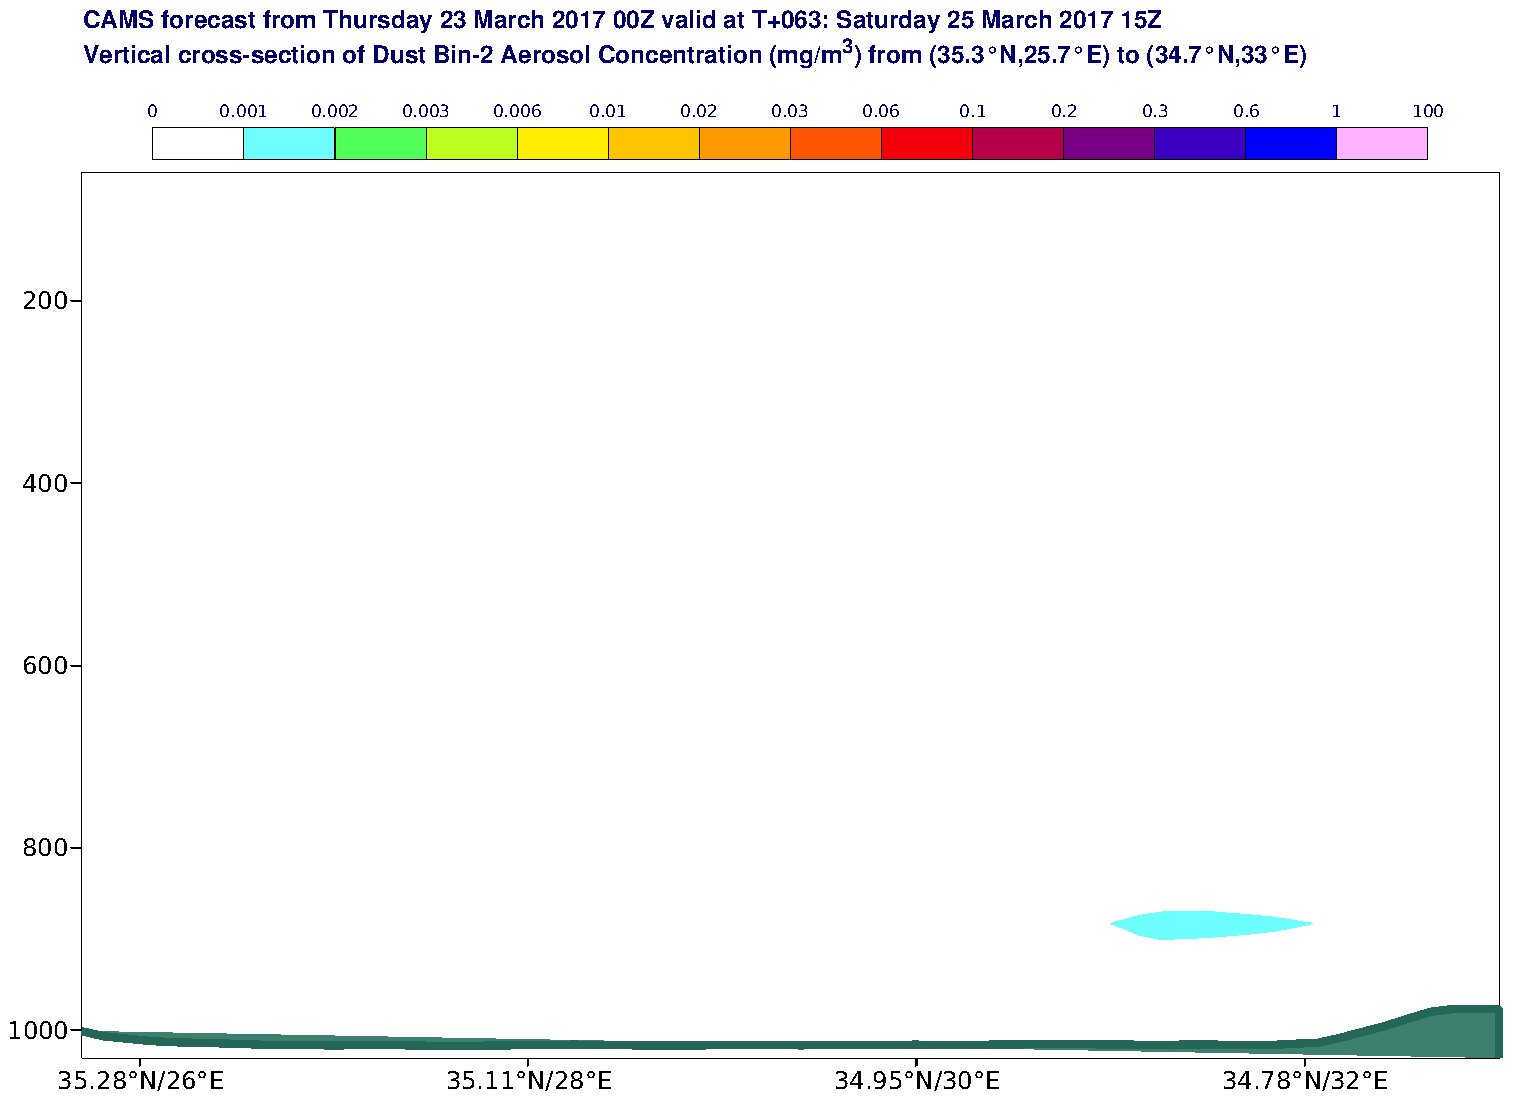 Vertical cross-section of Dust Bin-2 Aerosol Concentration (mg/m3) valid at T63 - 2017-03-25 15:00